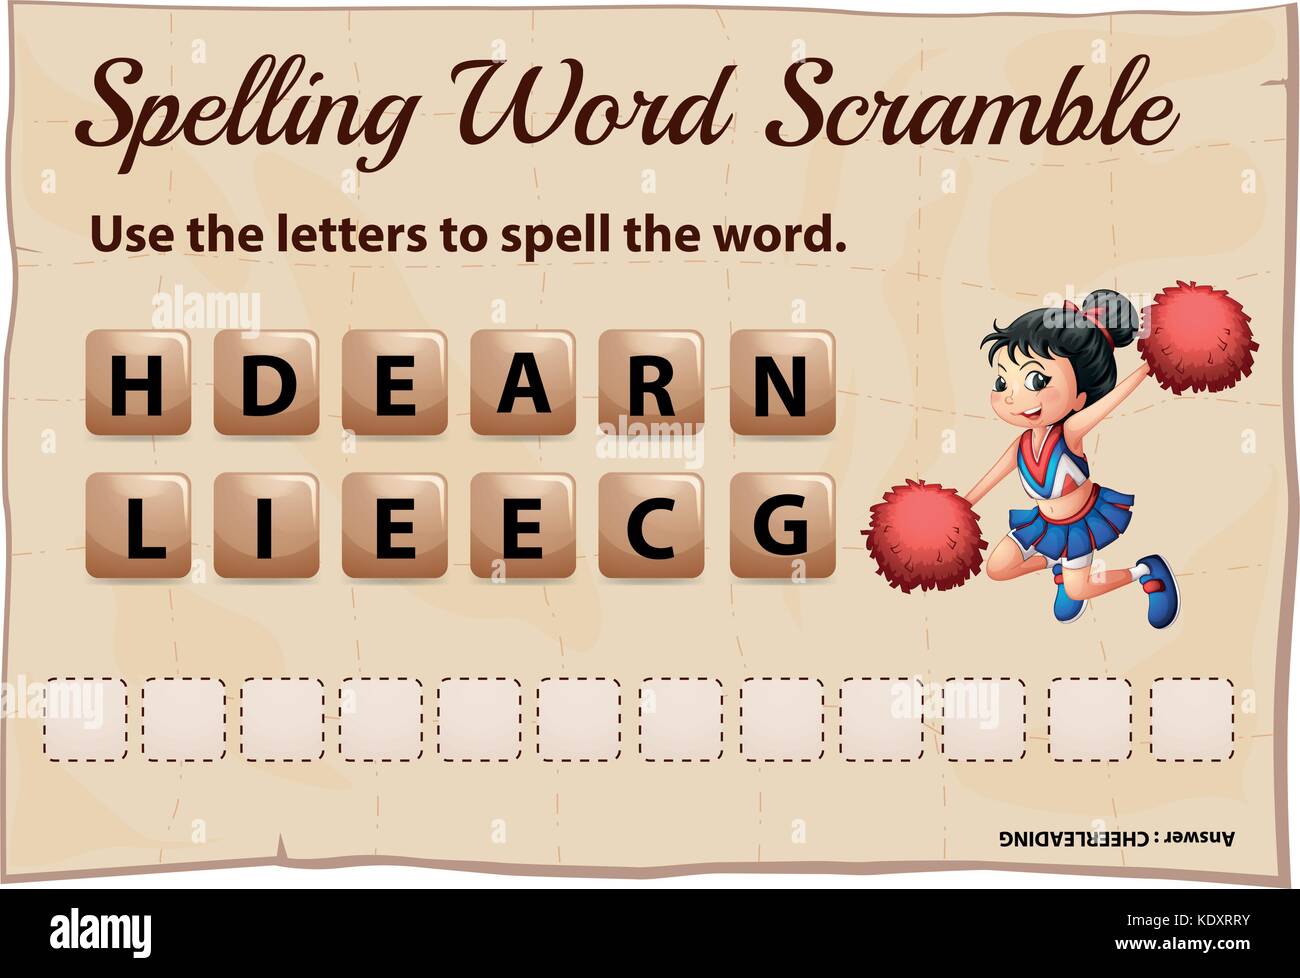 Spelling word scramble game template with cheerleading illustration Stock Vector